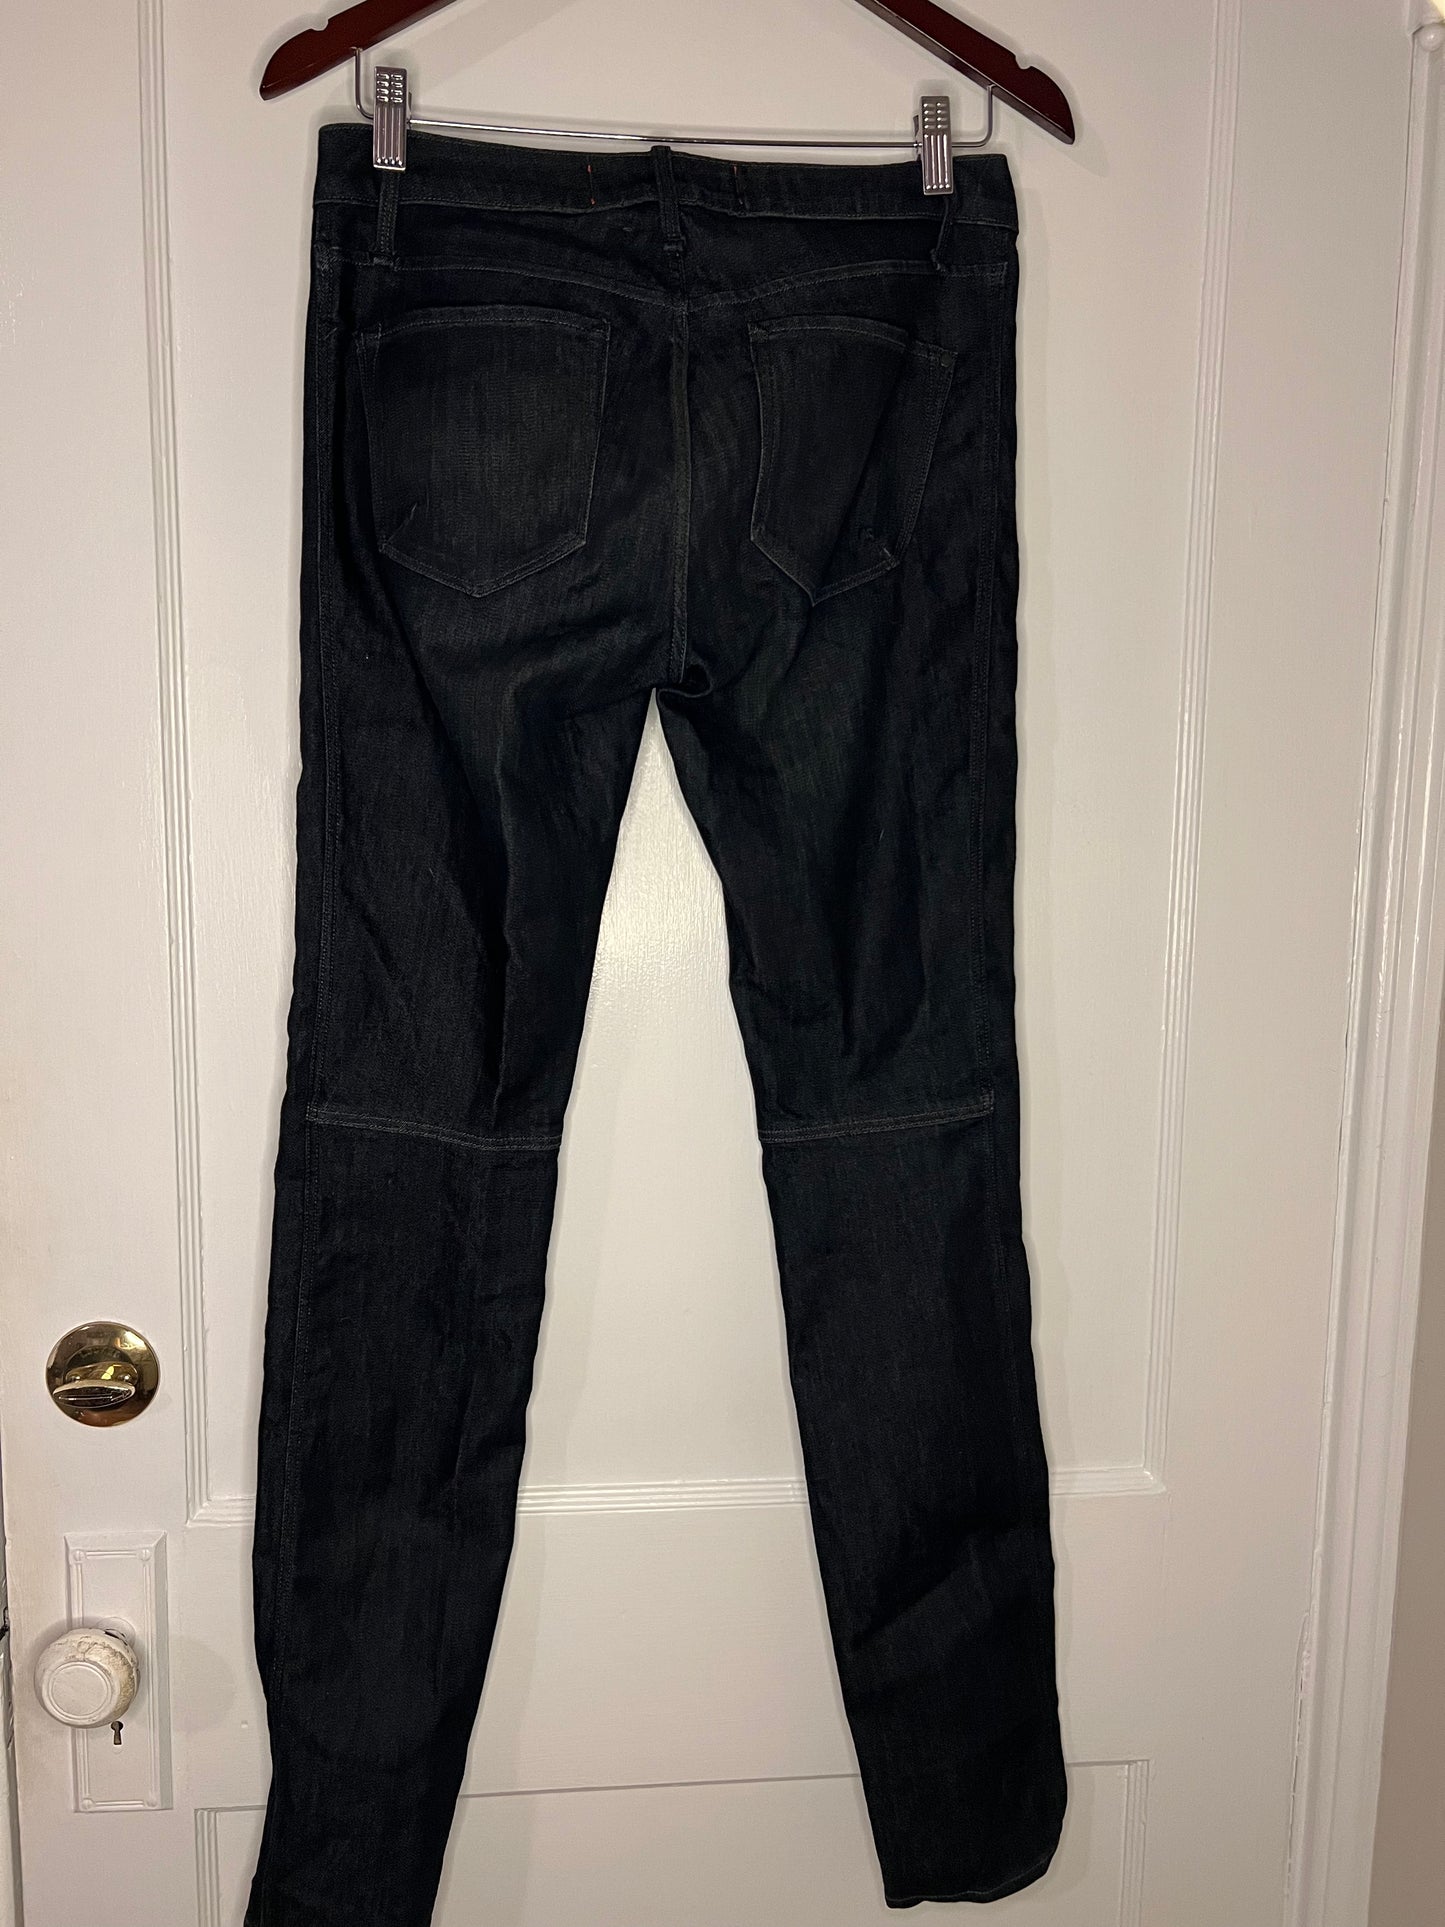 Marc by Marc Jacobs Workwear Skinny Jeans Size 27 PPU 45208 or SCO Spring Sale